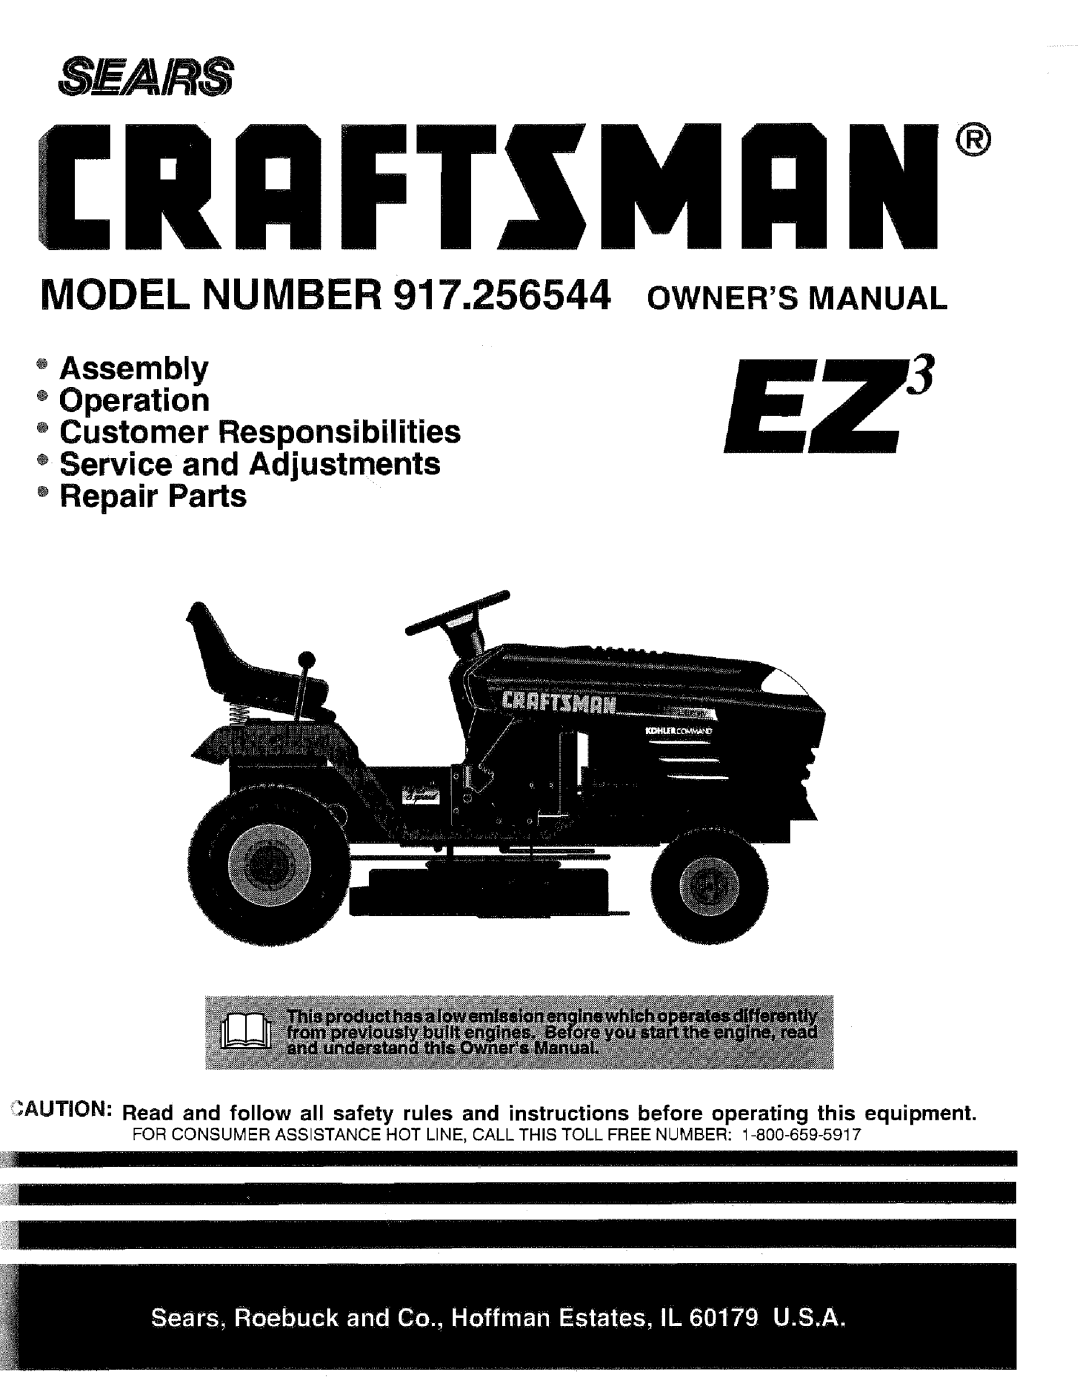 Craftsman owner manual MODEL NUMBER 917.256544 OWNERSMANUAL, Assembly Operation Customer Responsibilities, nFTZMON 